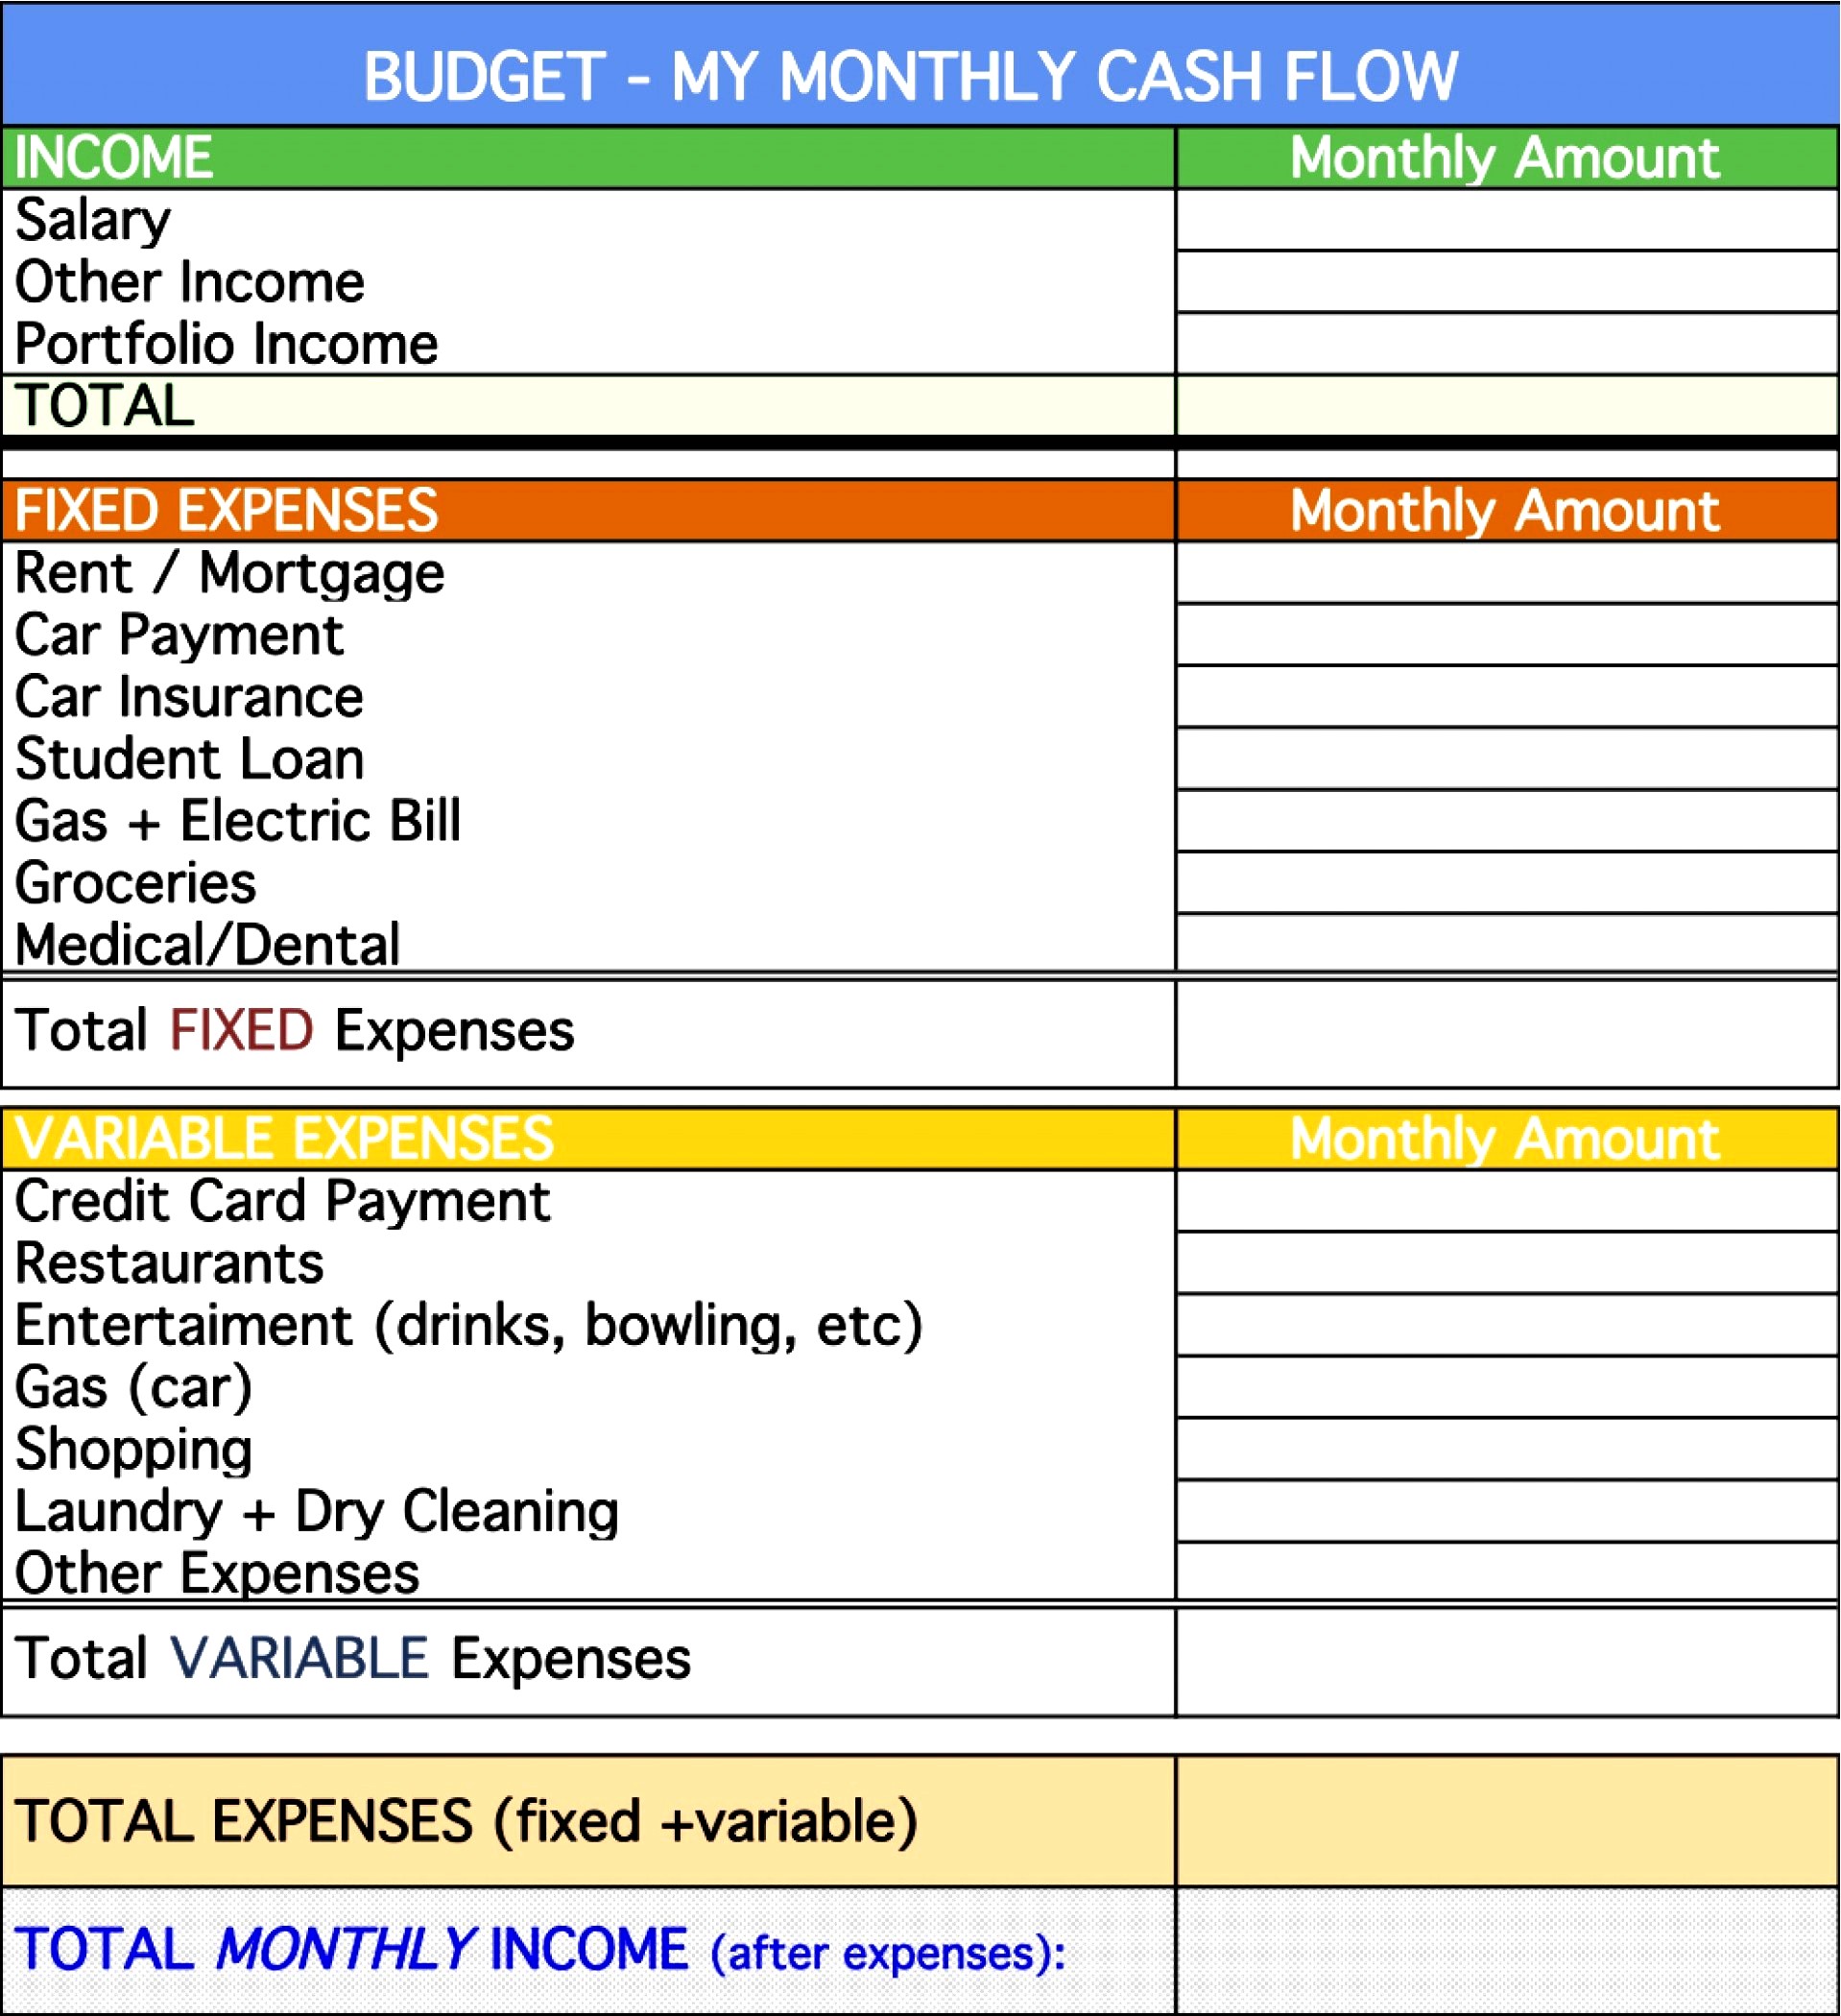 monthly budget sample personal city